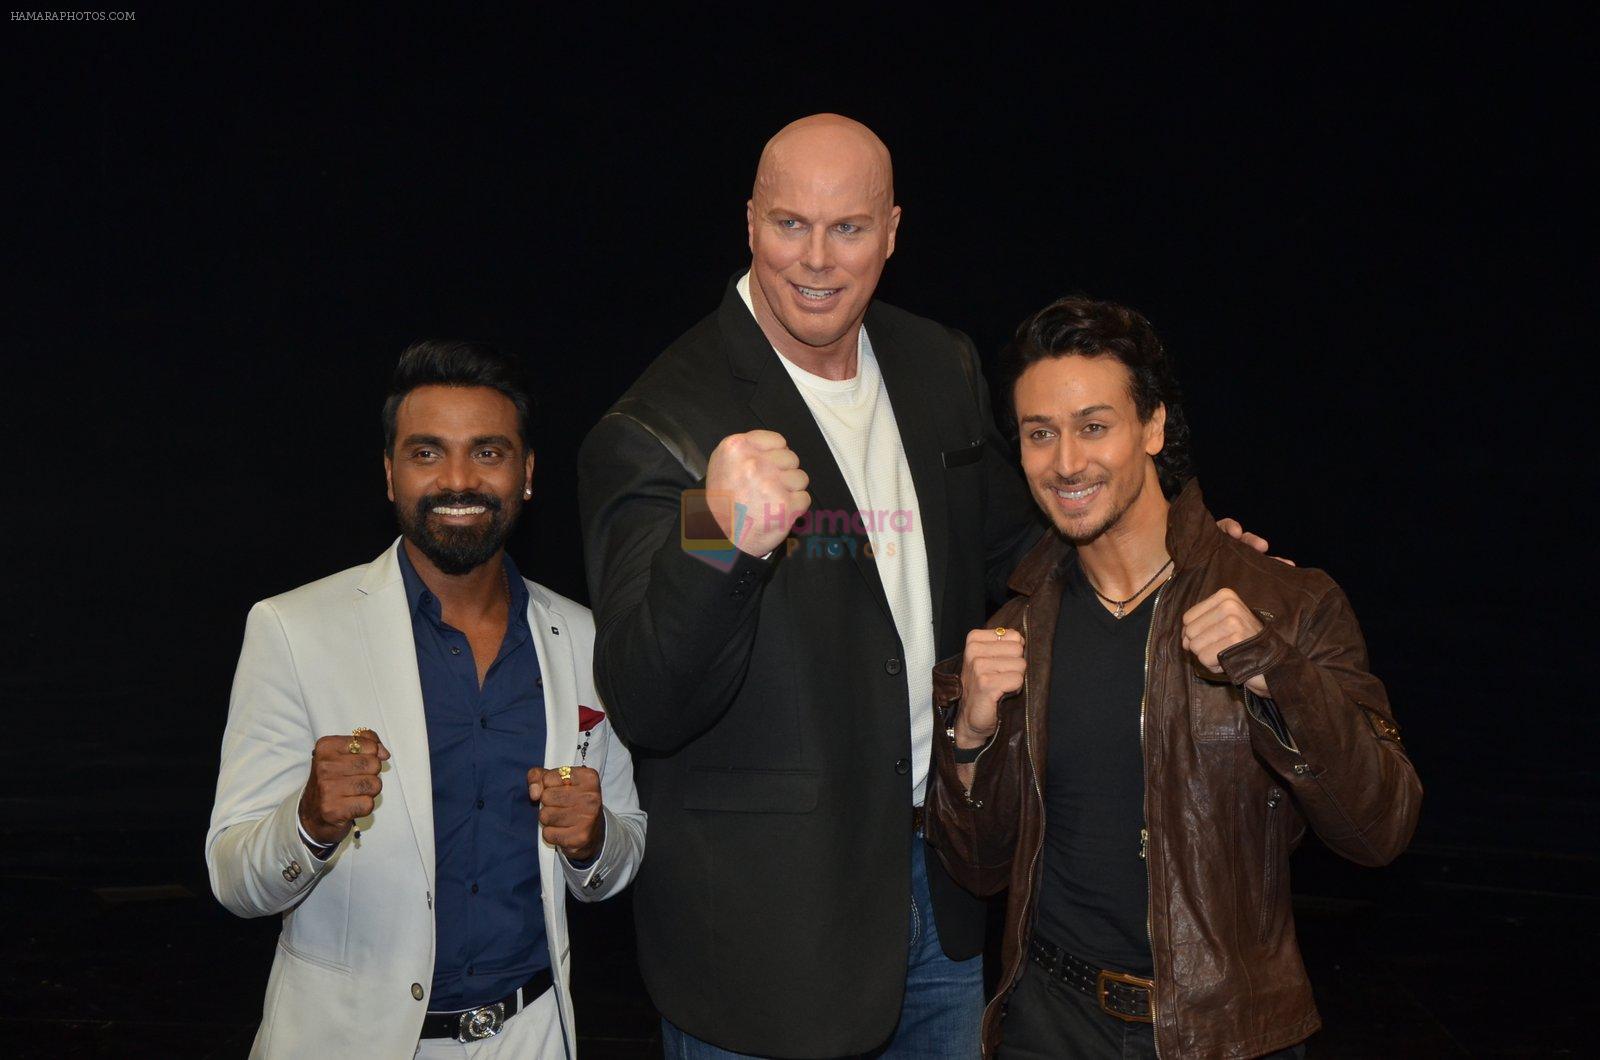 Tiger Shroff, Nathan Jones, Remo D Souza at A Flying Jatt film promotions on the sets of Dance Plus Season 2 on 19th July 2016